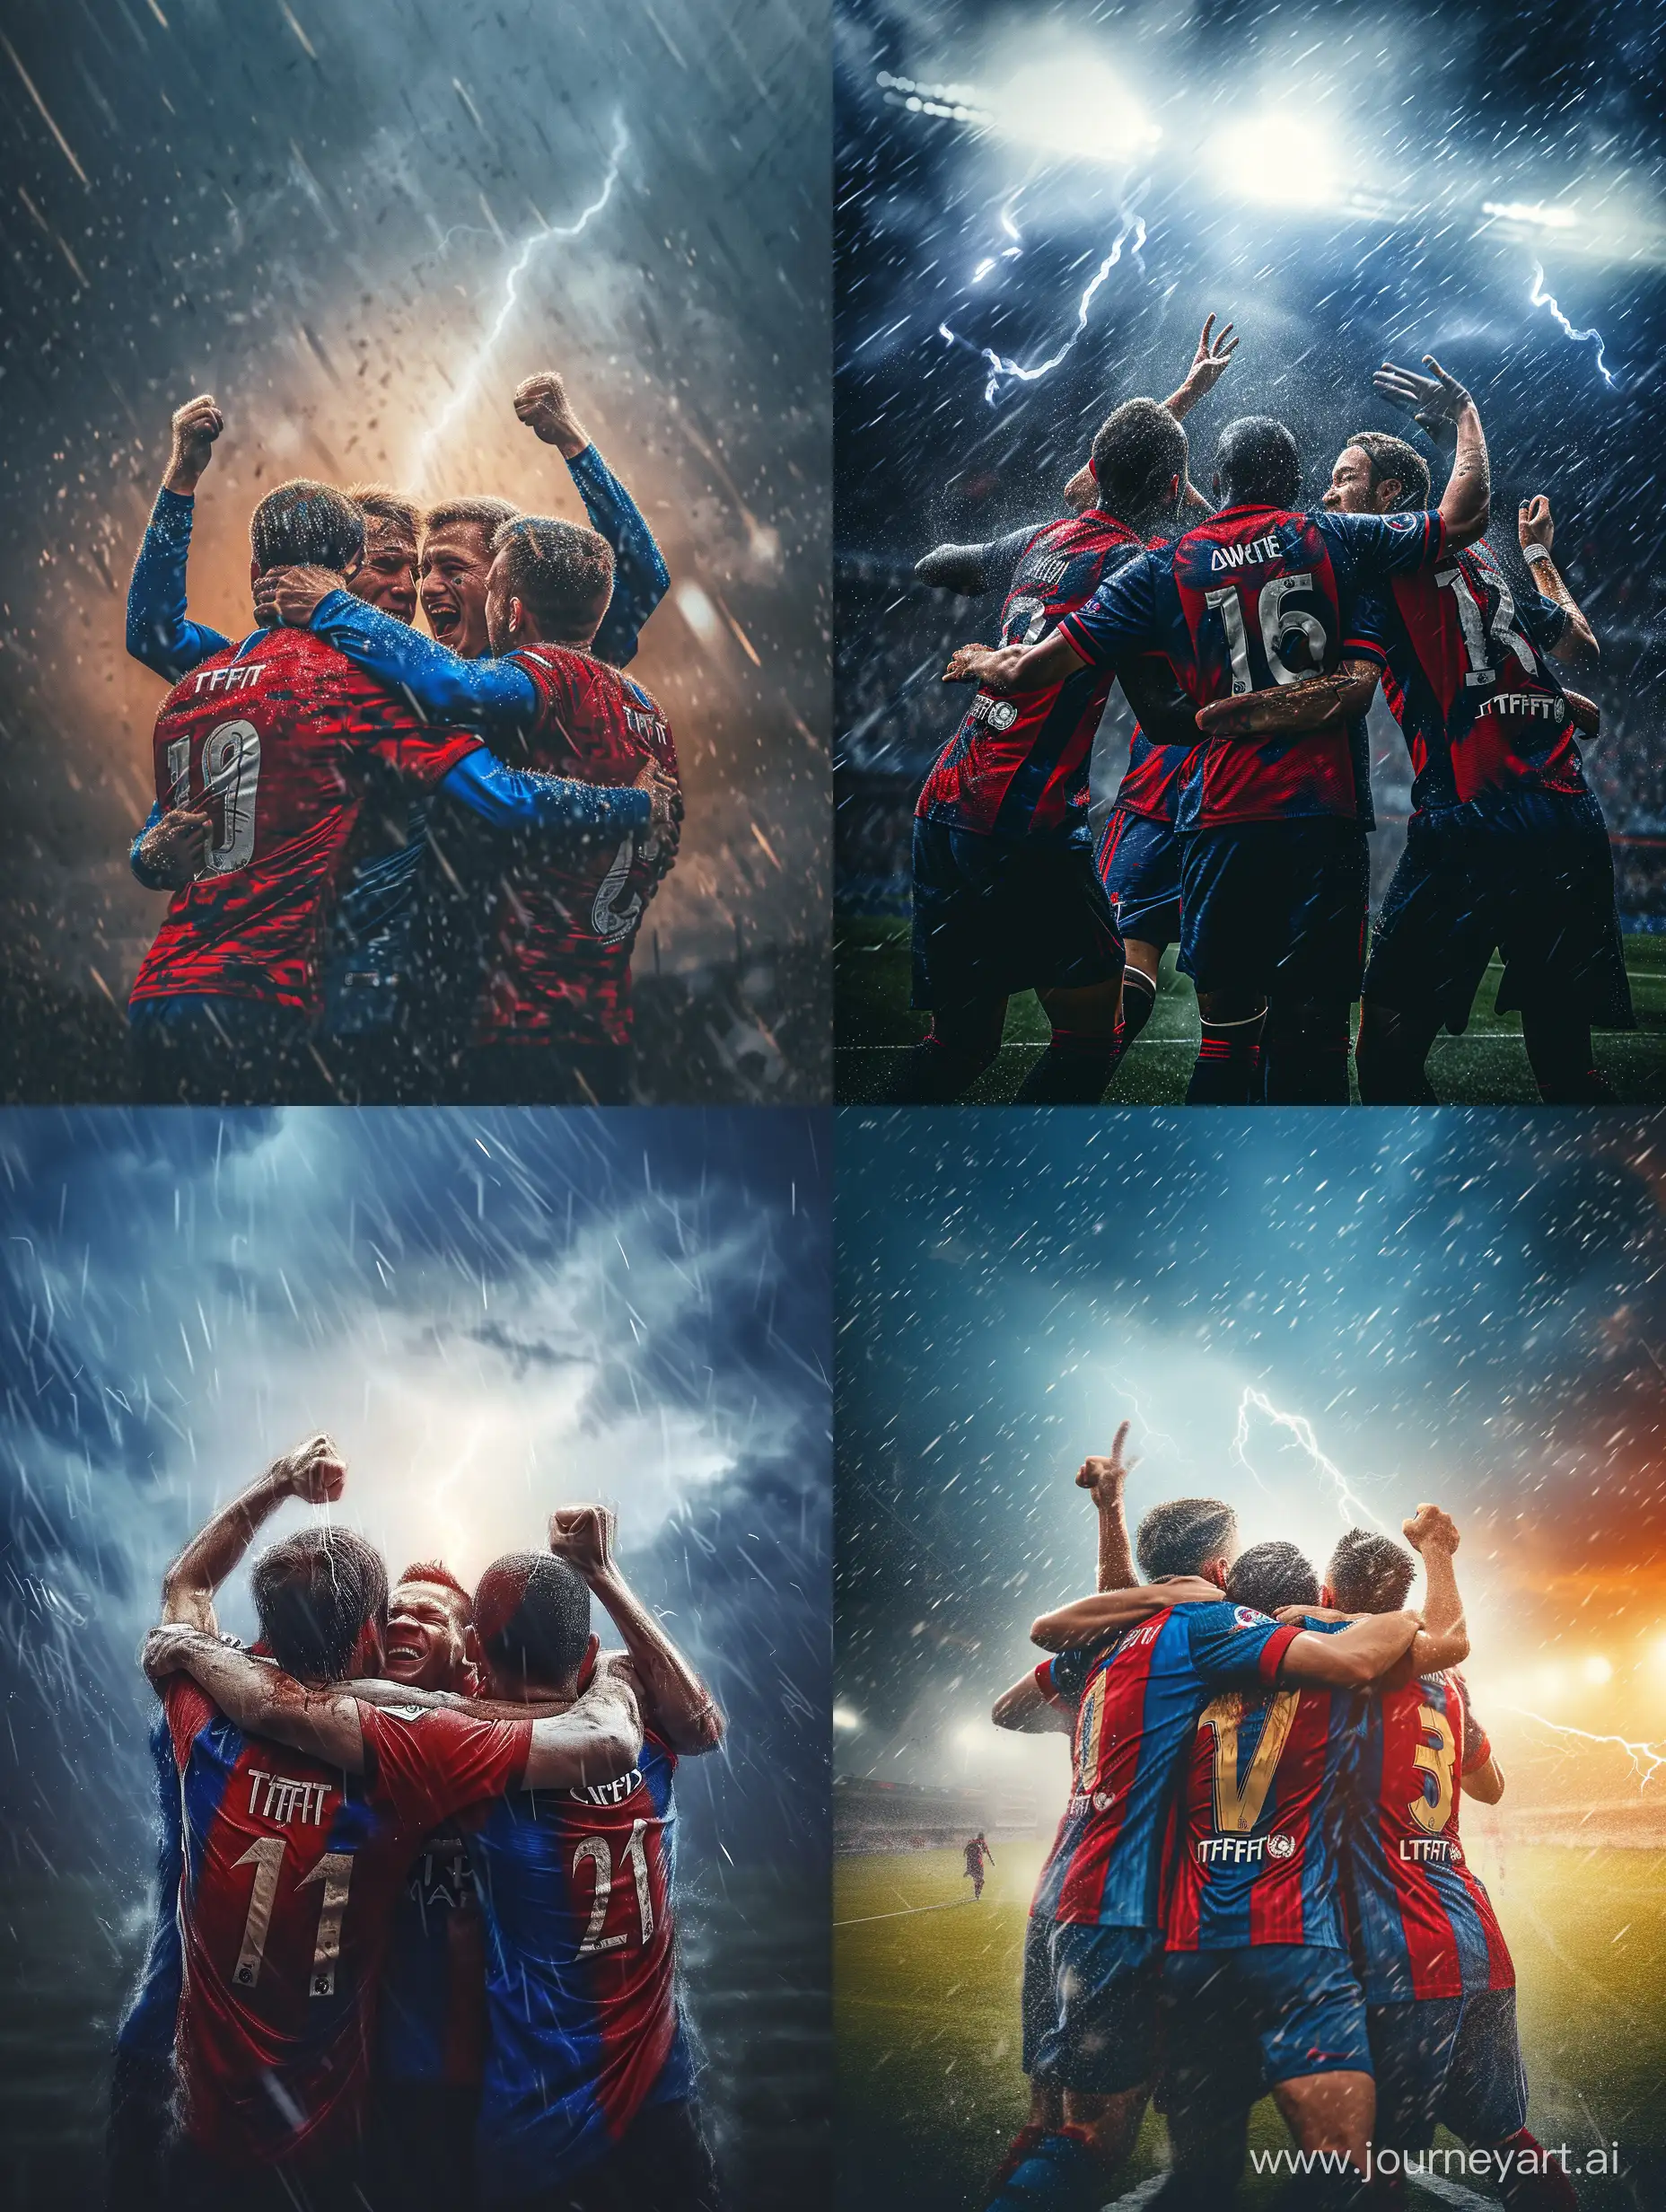 Soccer-Players-Goal-Celebration-in-Striking-Red-and-Blue-Jerseys